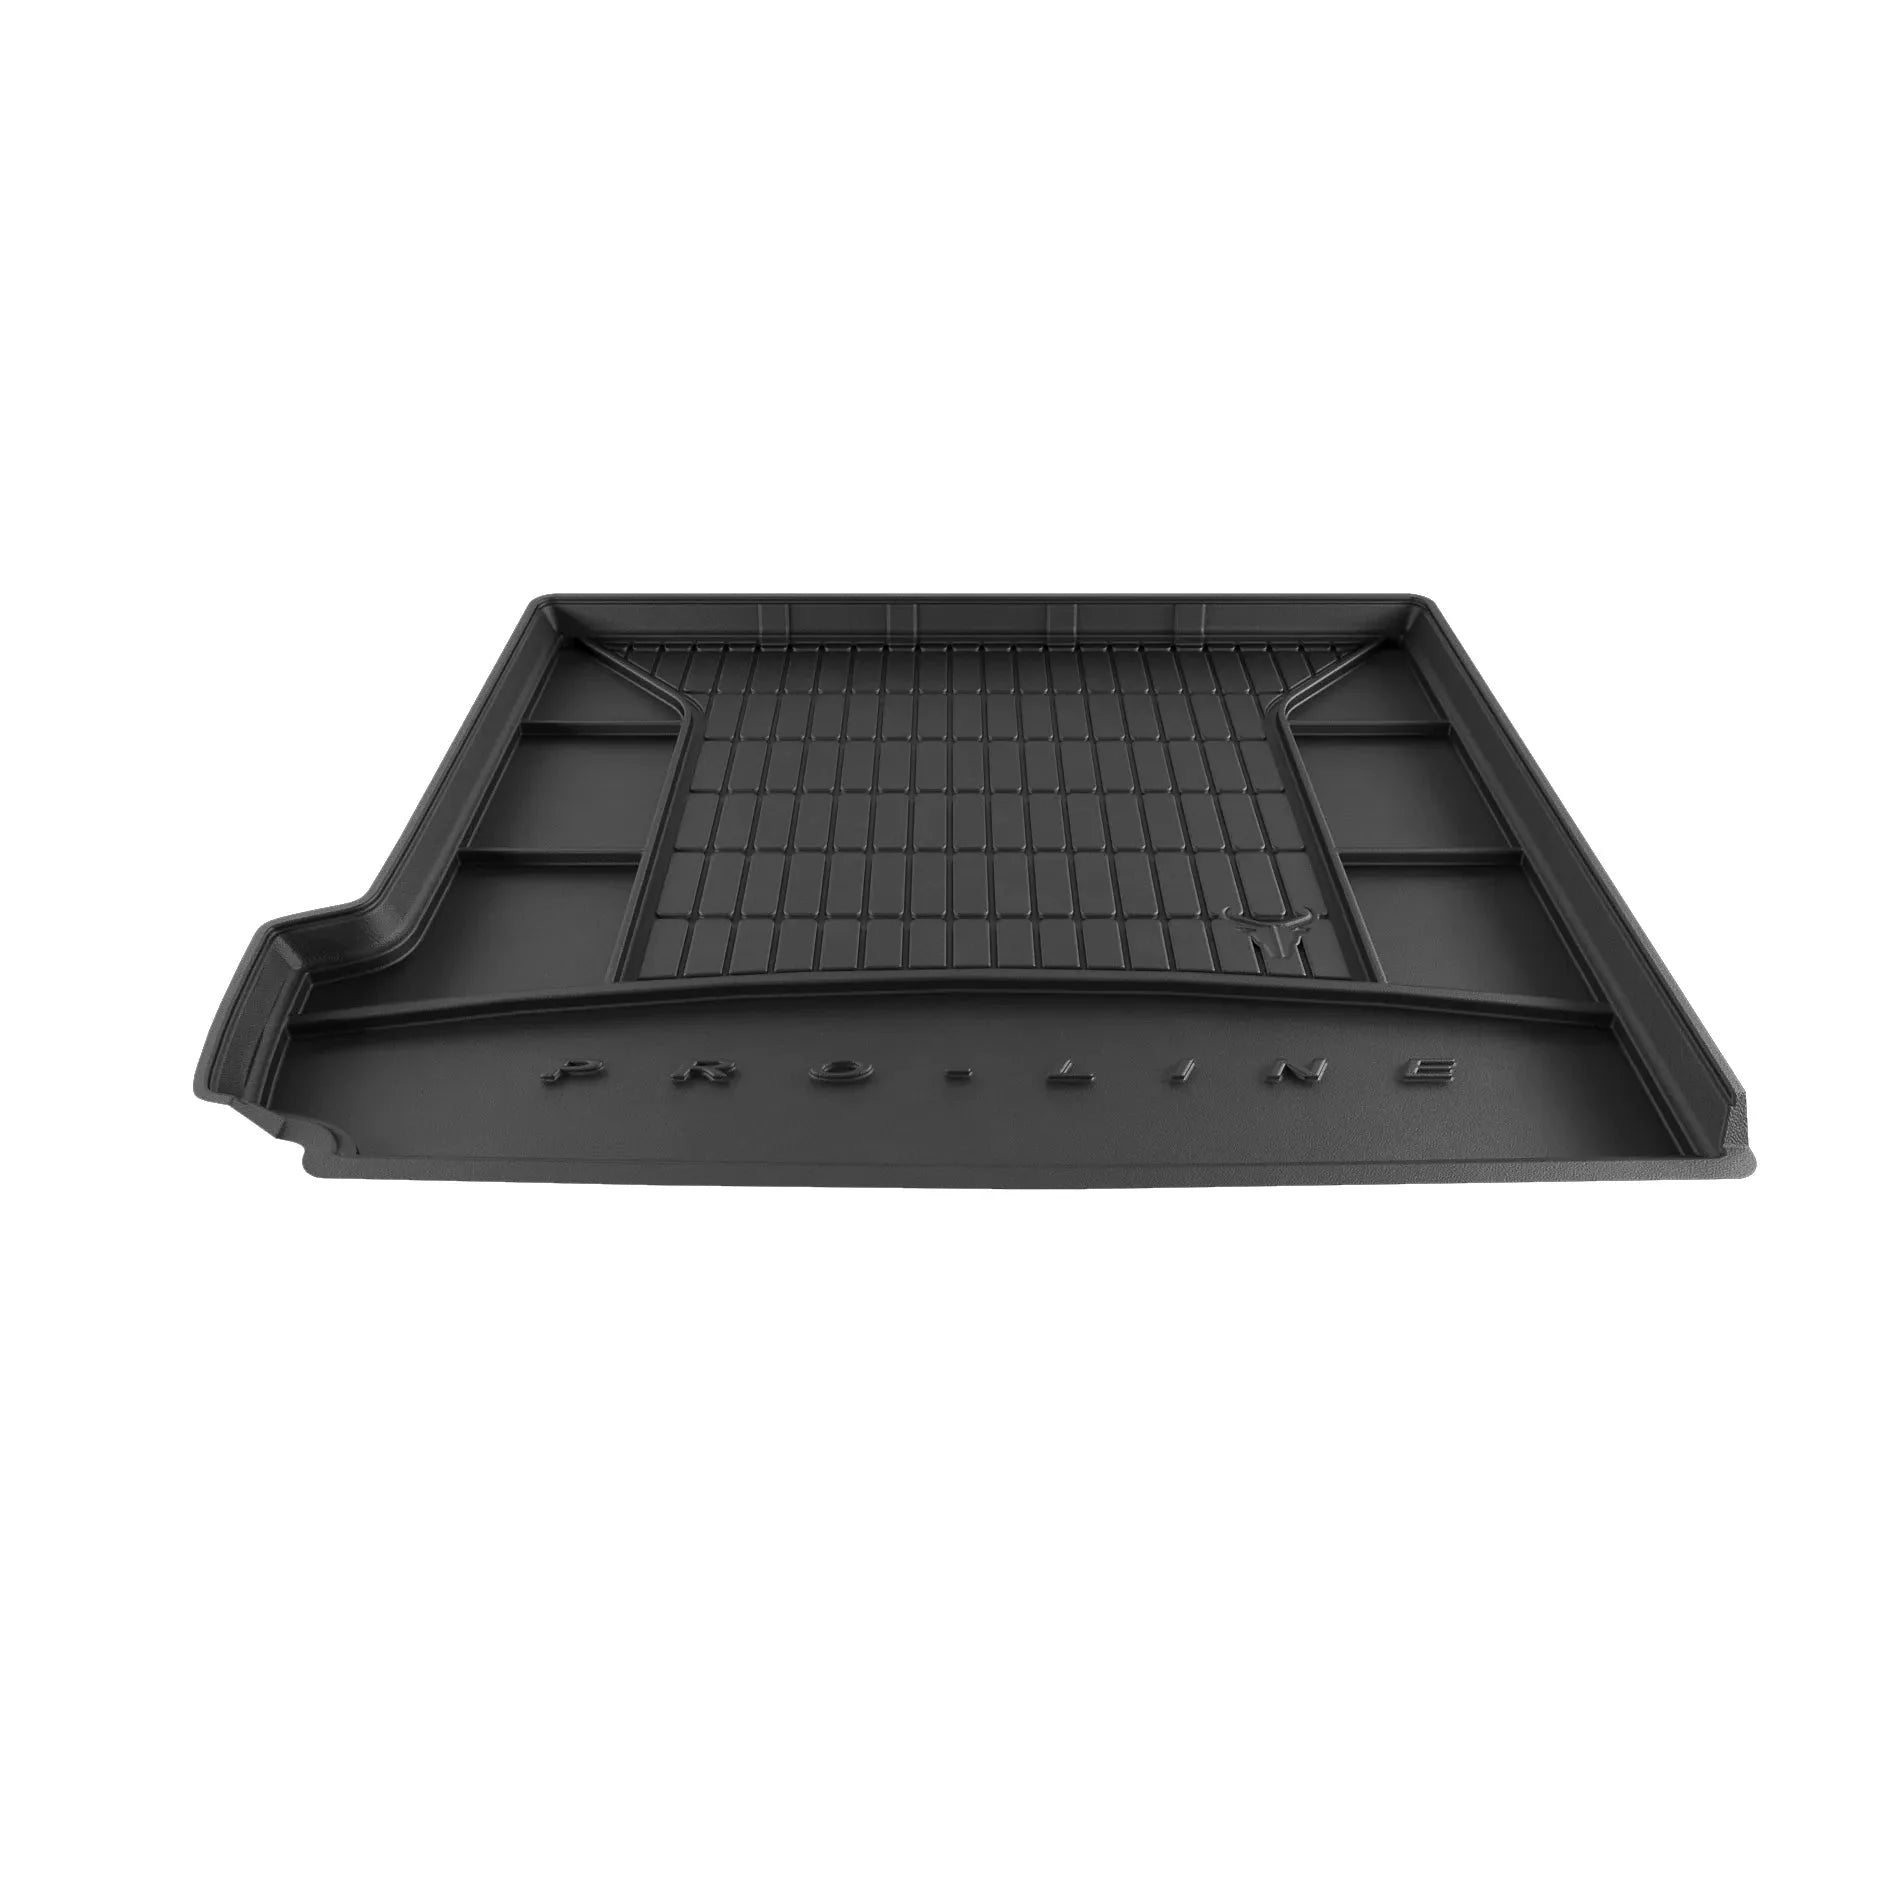 Tailored Car Boot Liner for Citroen - Protect Your Boot from Dirt and Damage - Green Flag vGroup